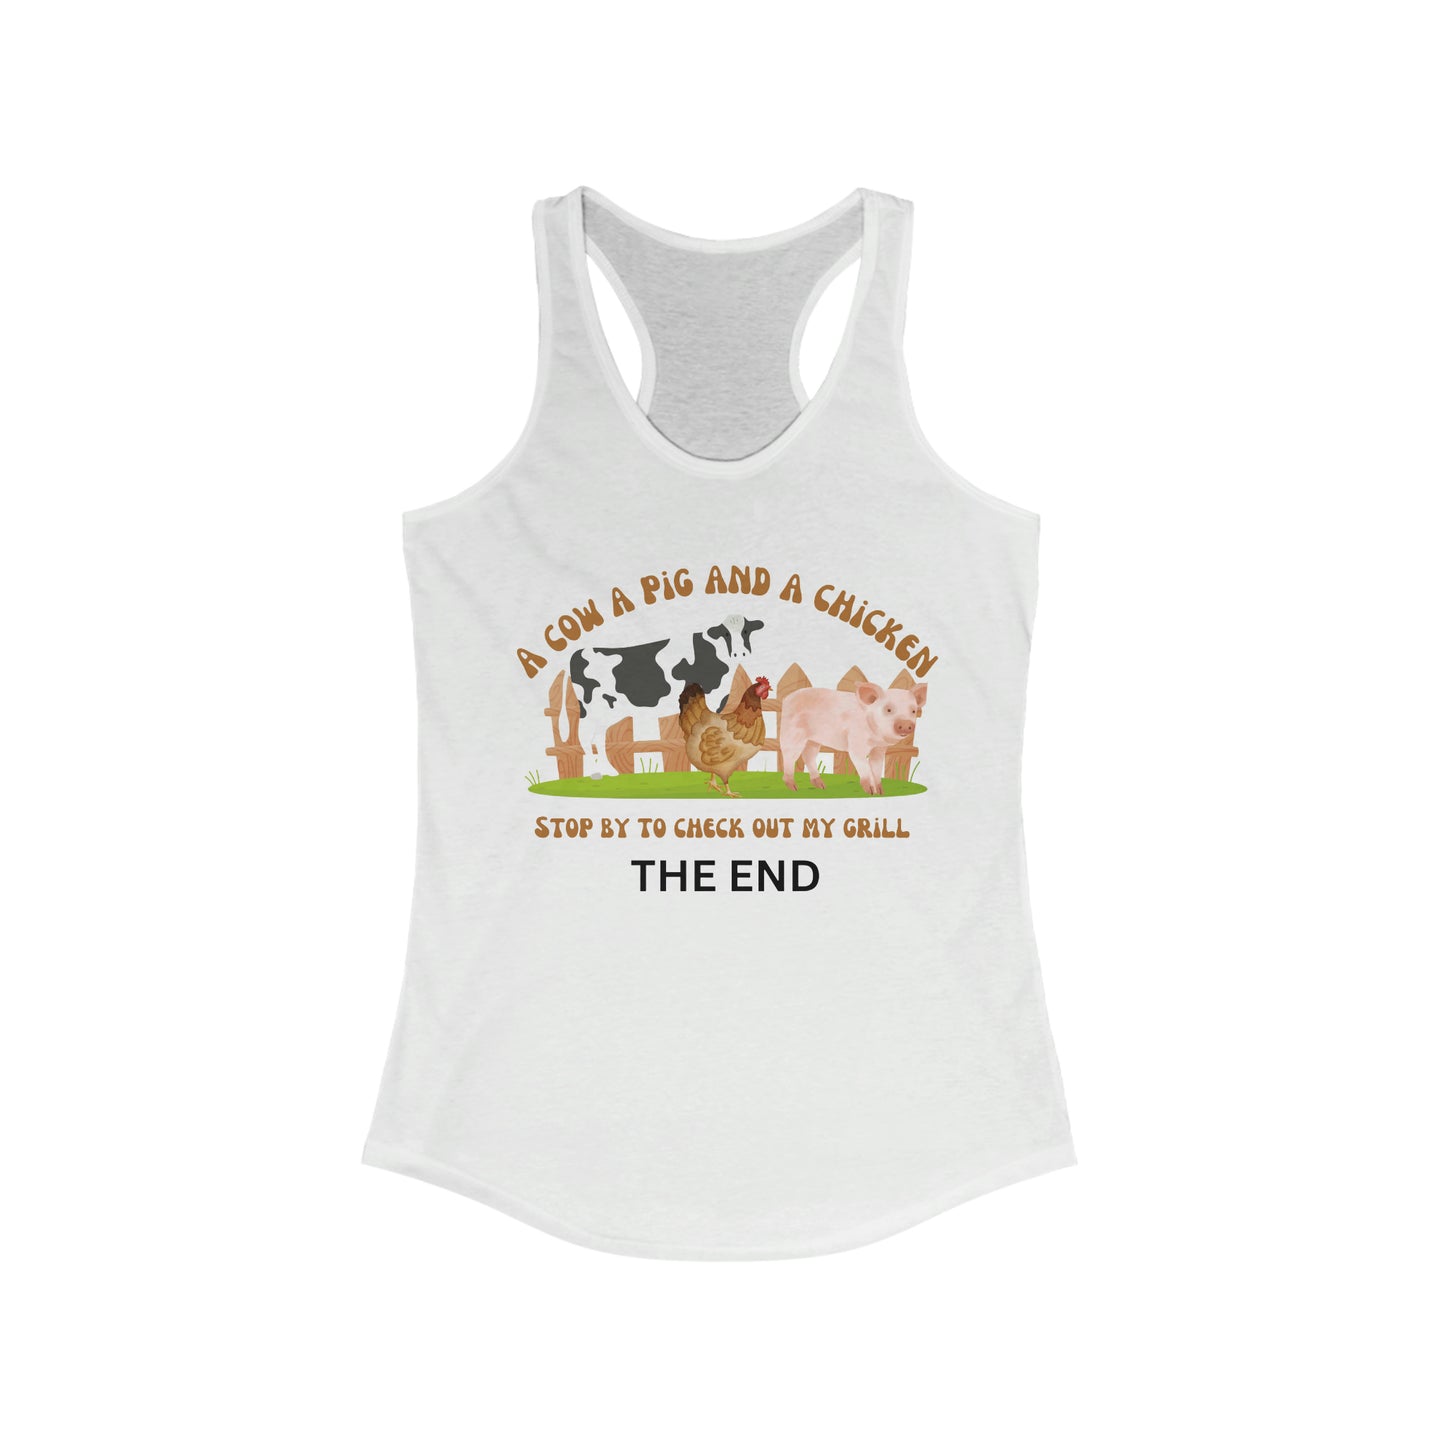 ‘A cow a pig and a chicken Stop by to check out my grill. THE END’.  Women's Ideal Racerback Tank